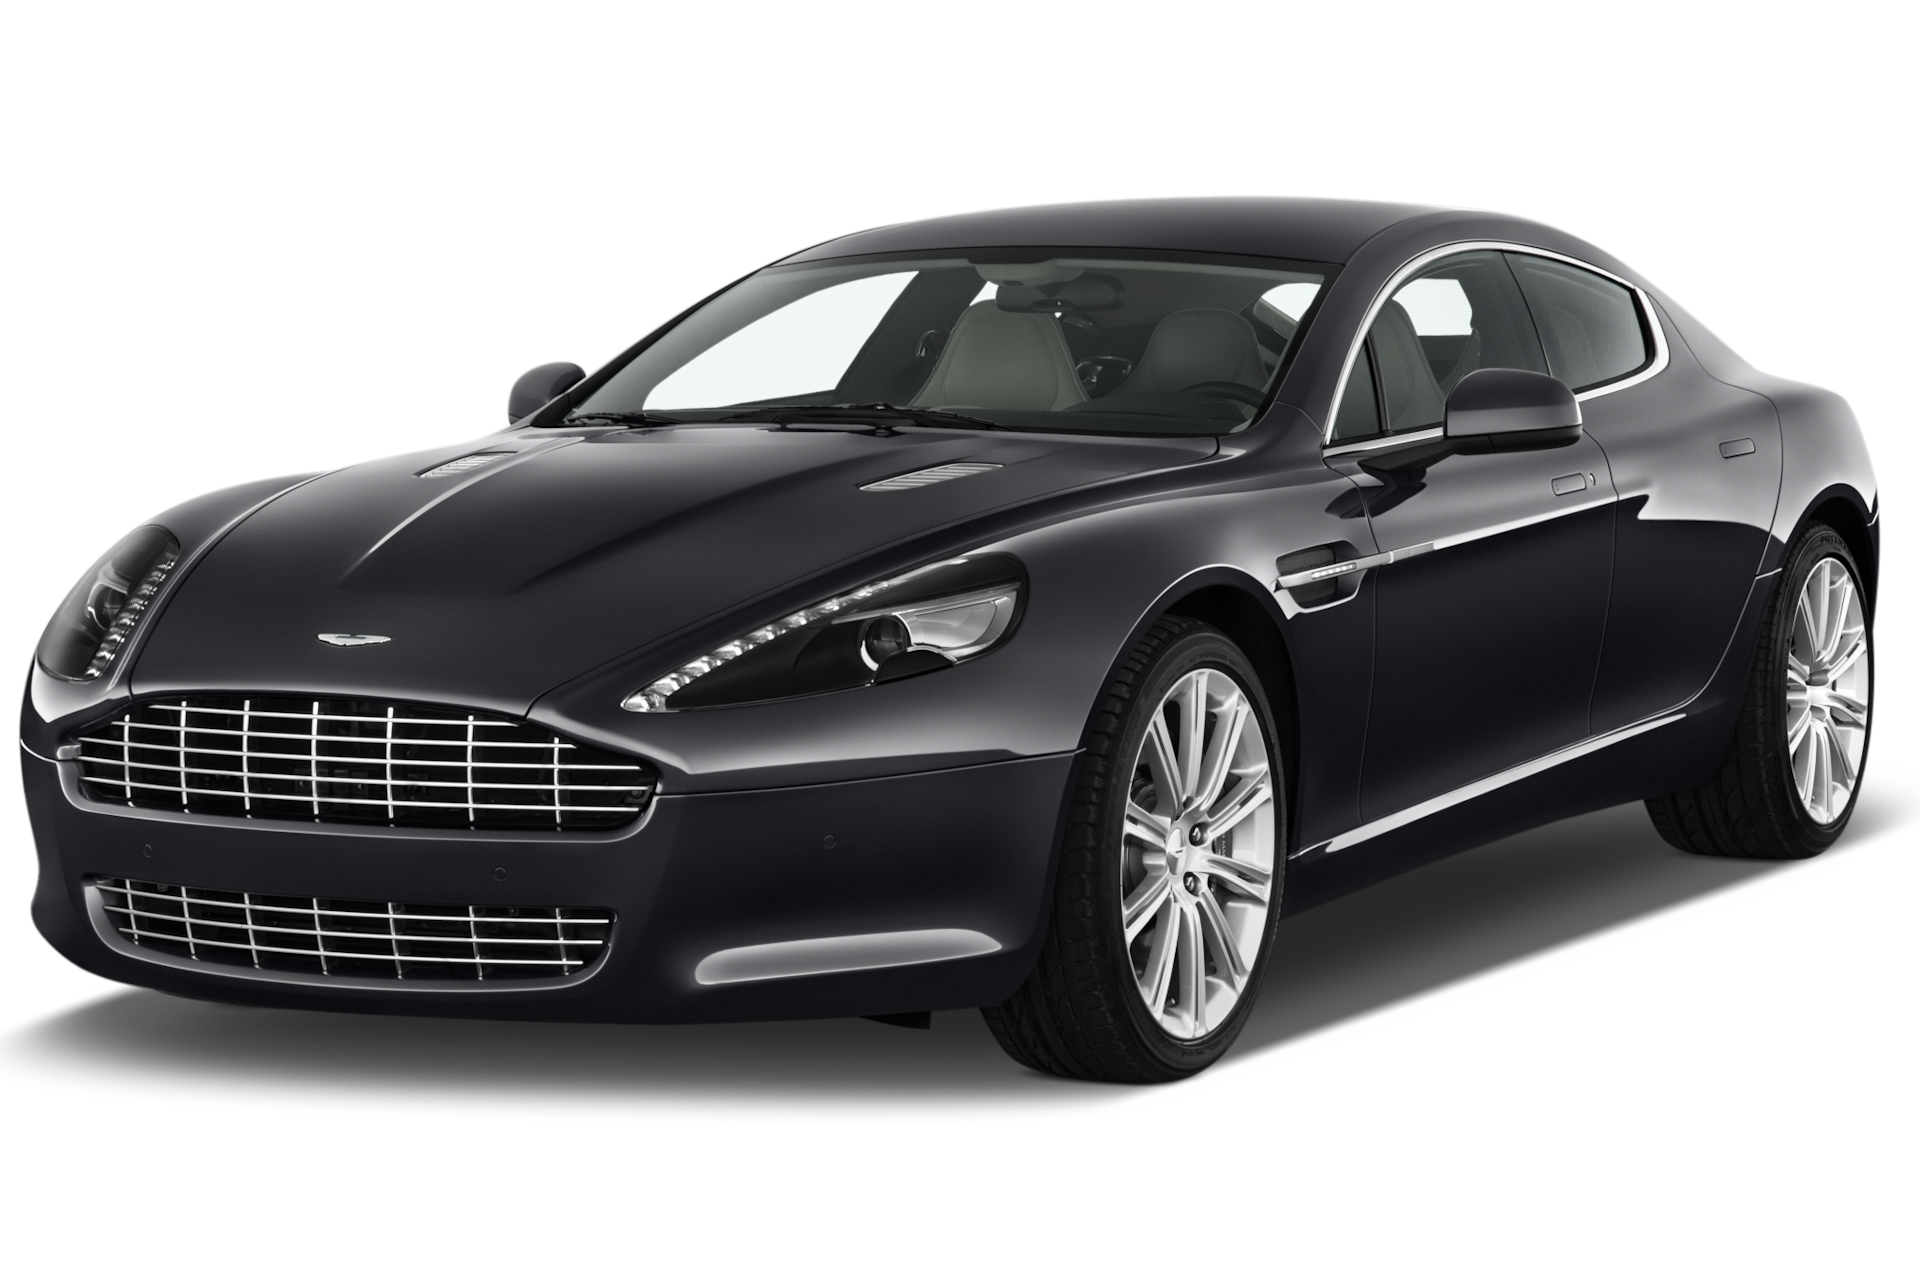 2013 Aston Martin Rapide Prices, Reviews, and Photos - MotorTrend